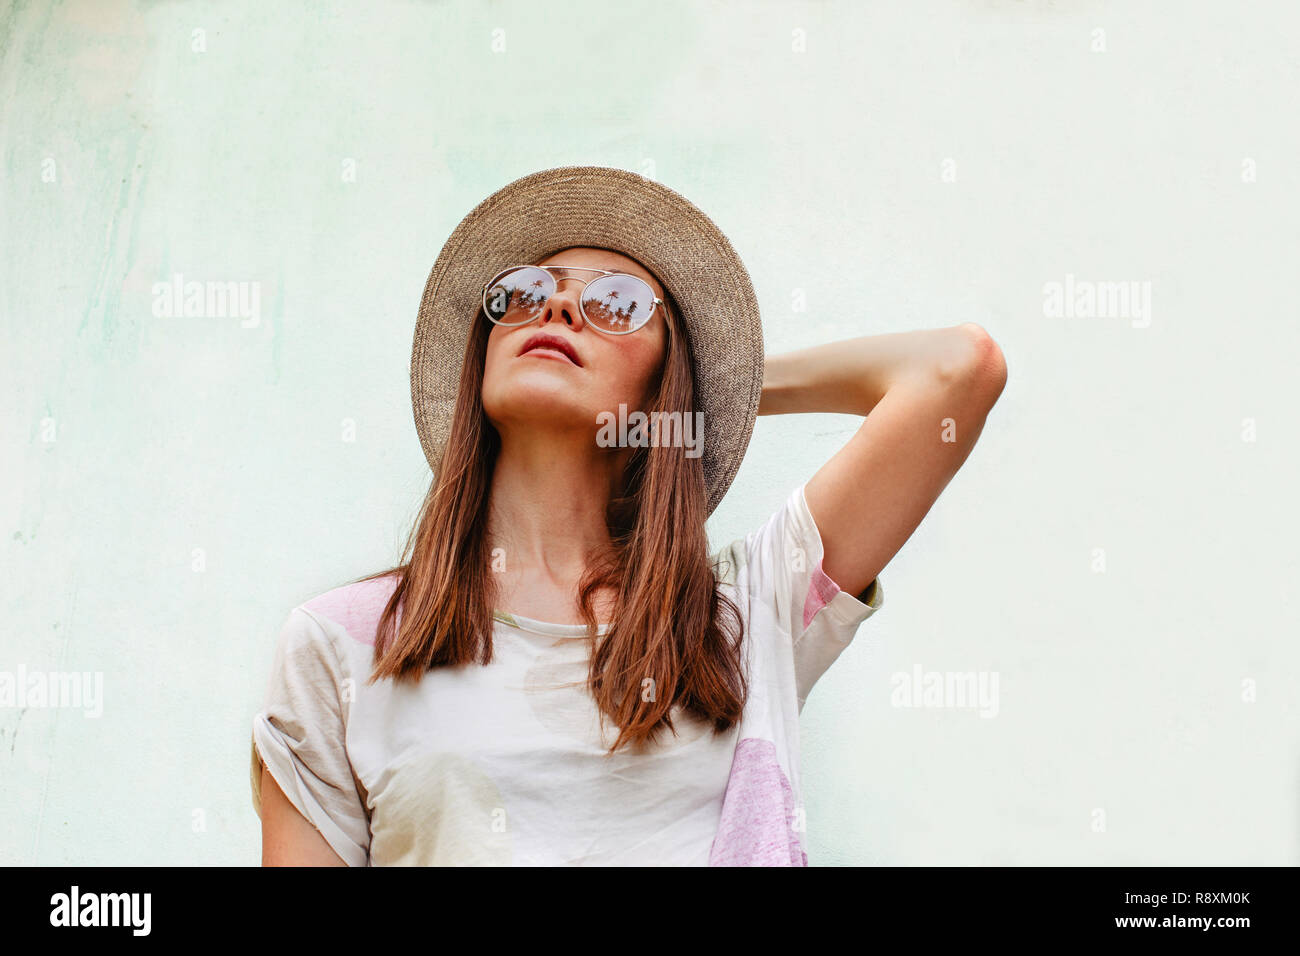 Woman in hat and sunglasses looking up Stock Photo